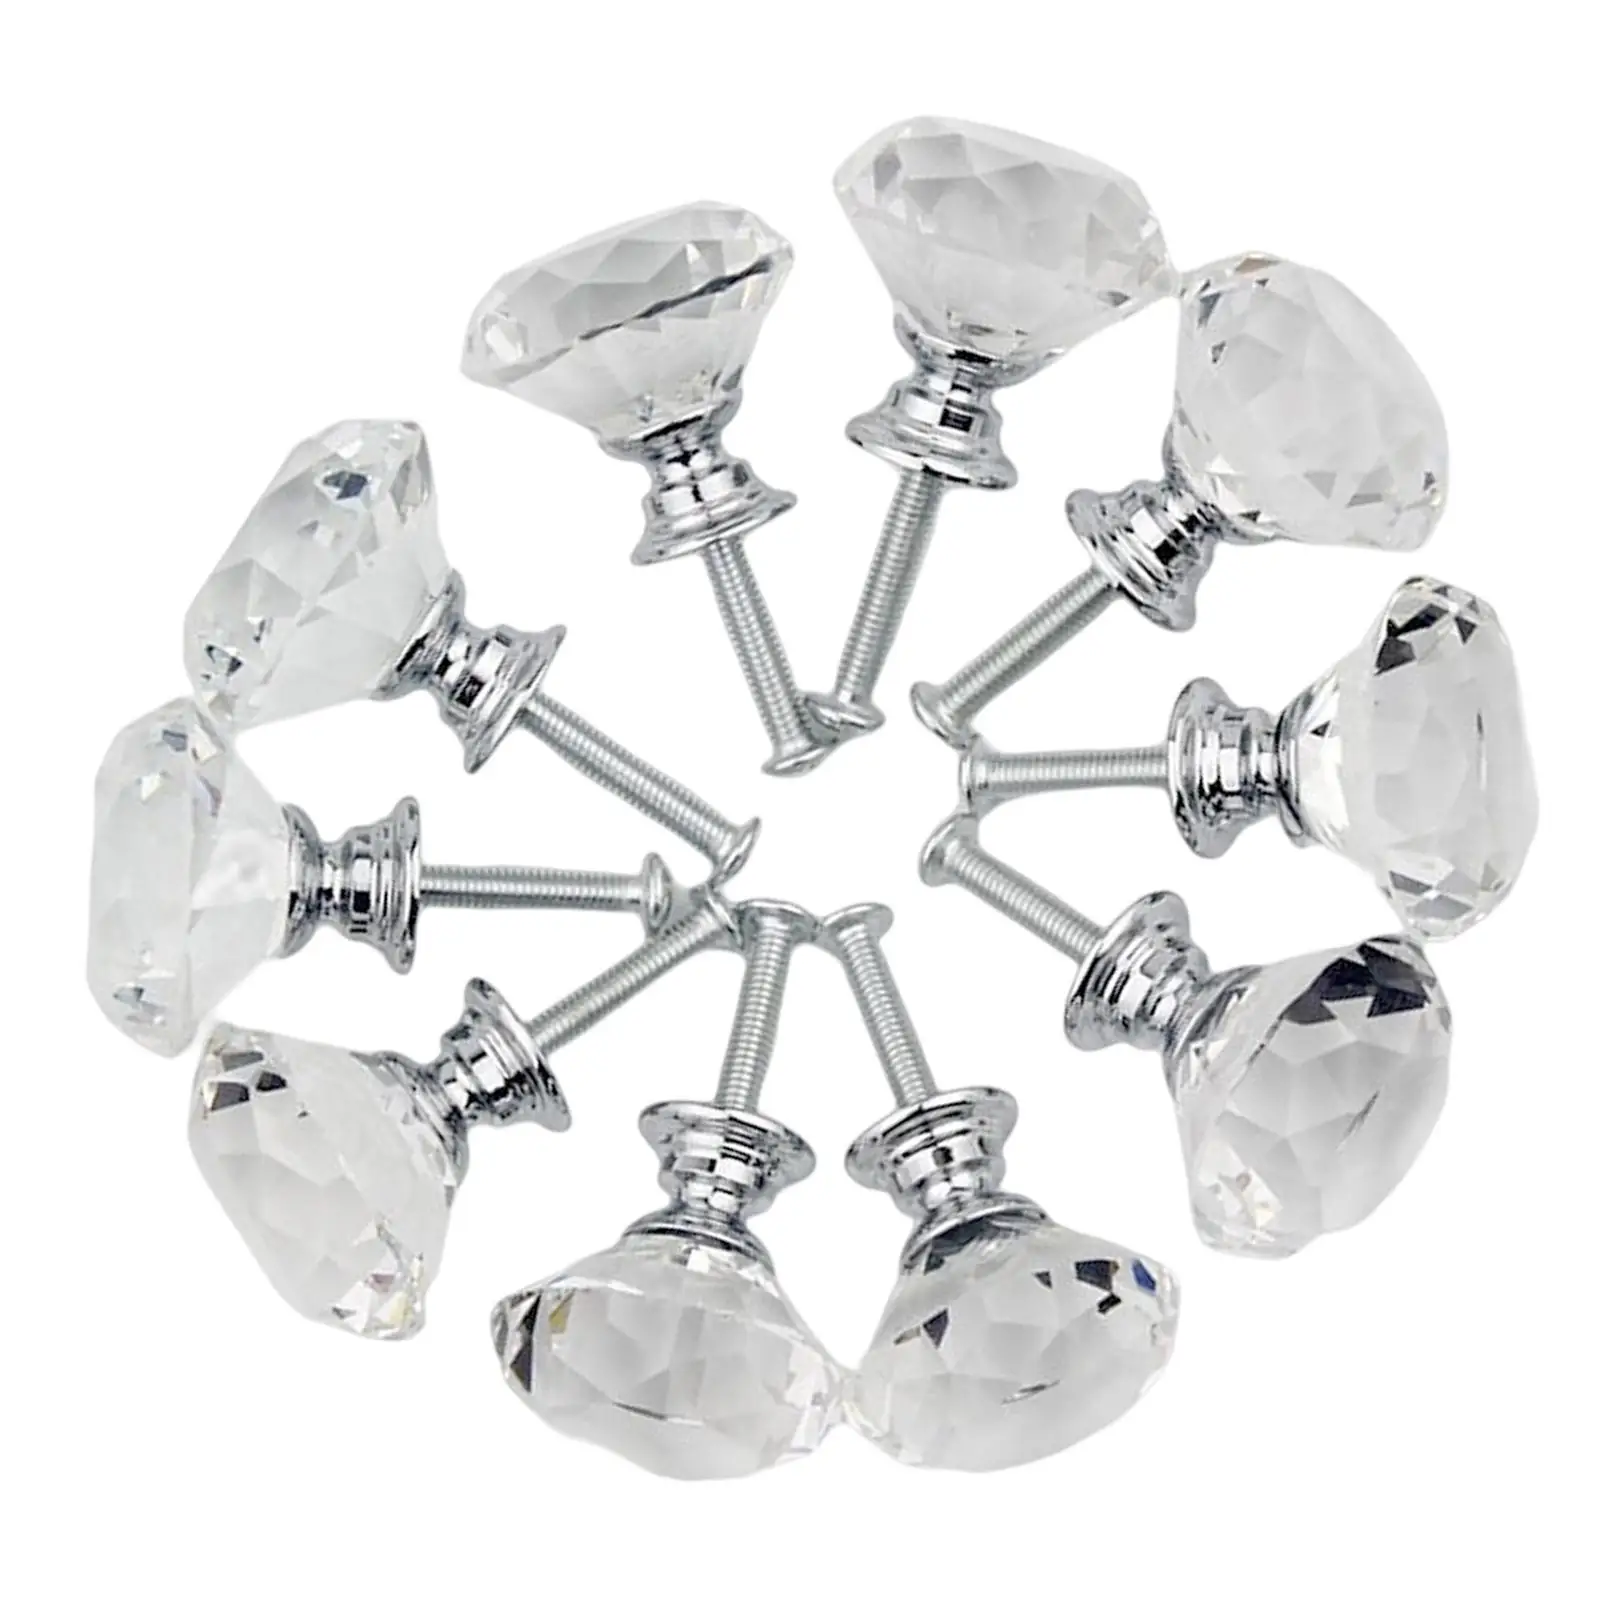 10x 30mm Crystal Glass Drawer Knobs Pulls Handles, for Home Kitchen Bathroom Easy to Install